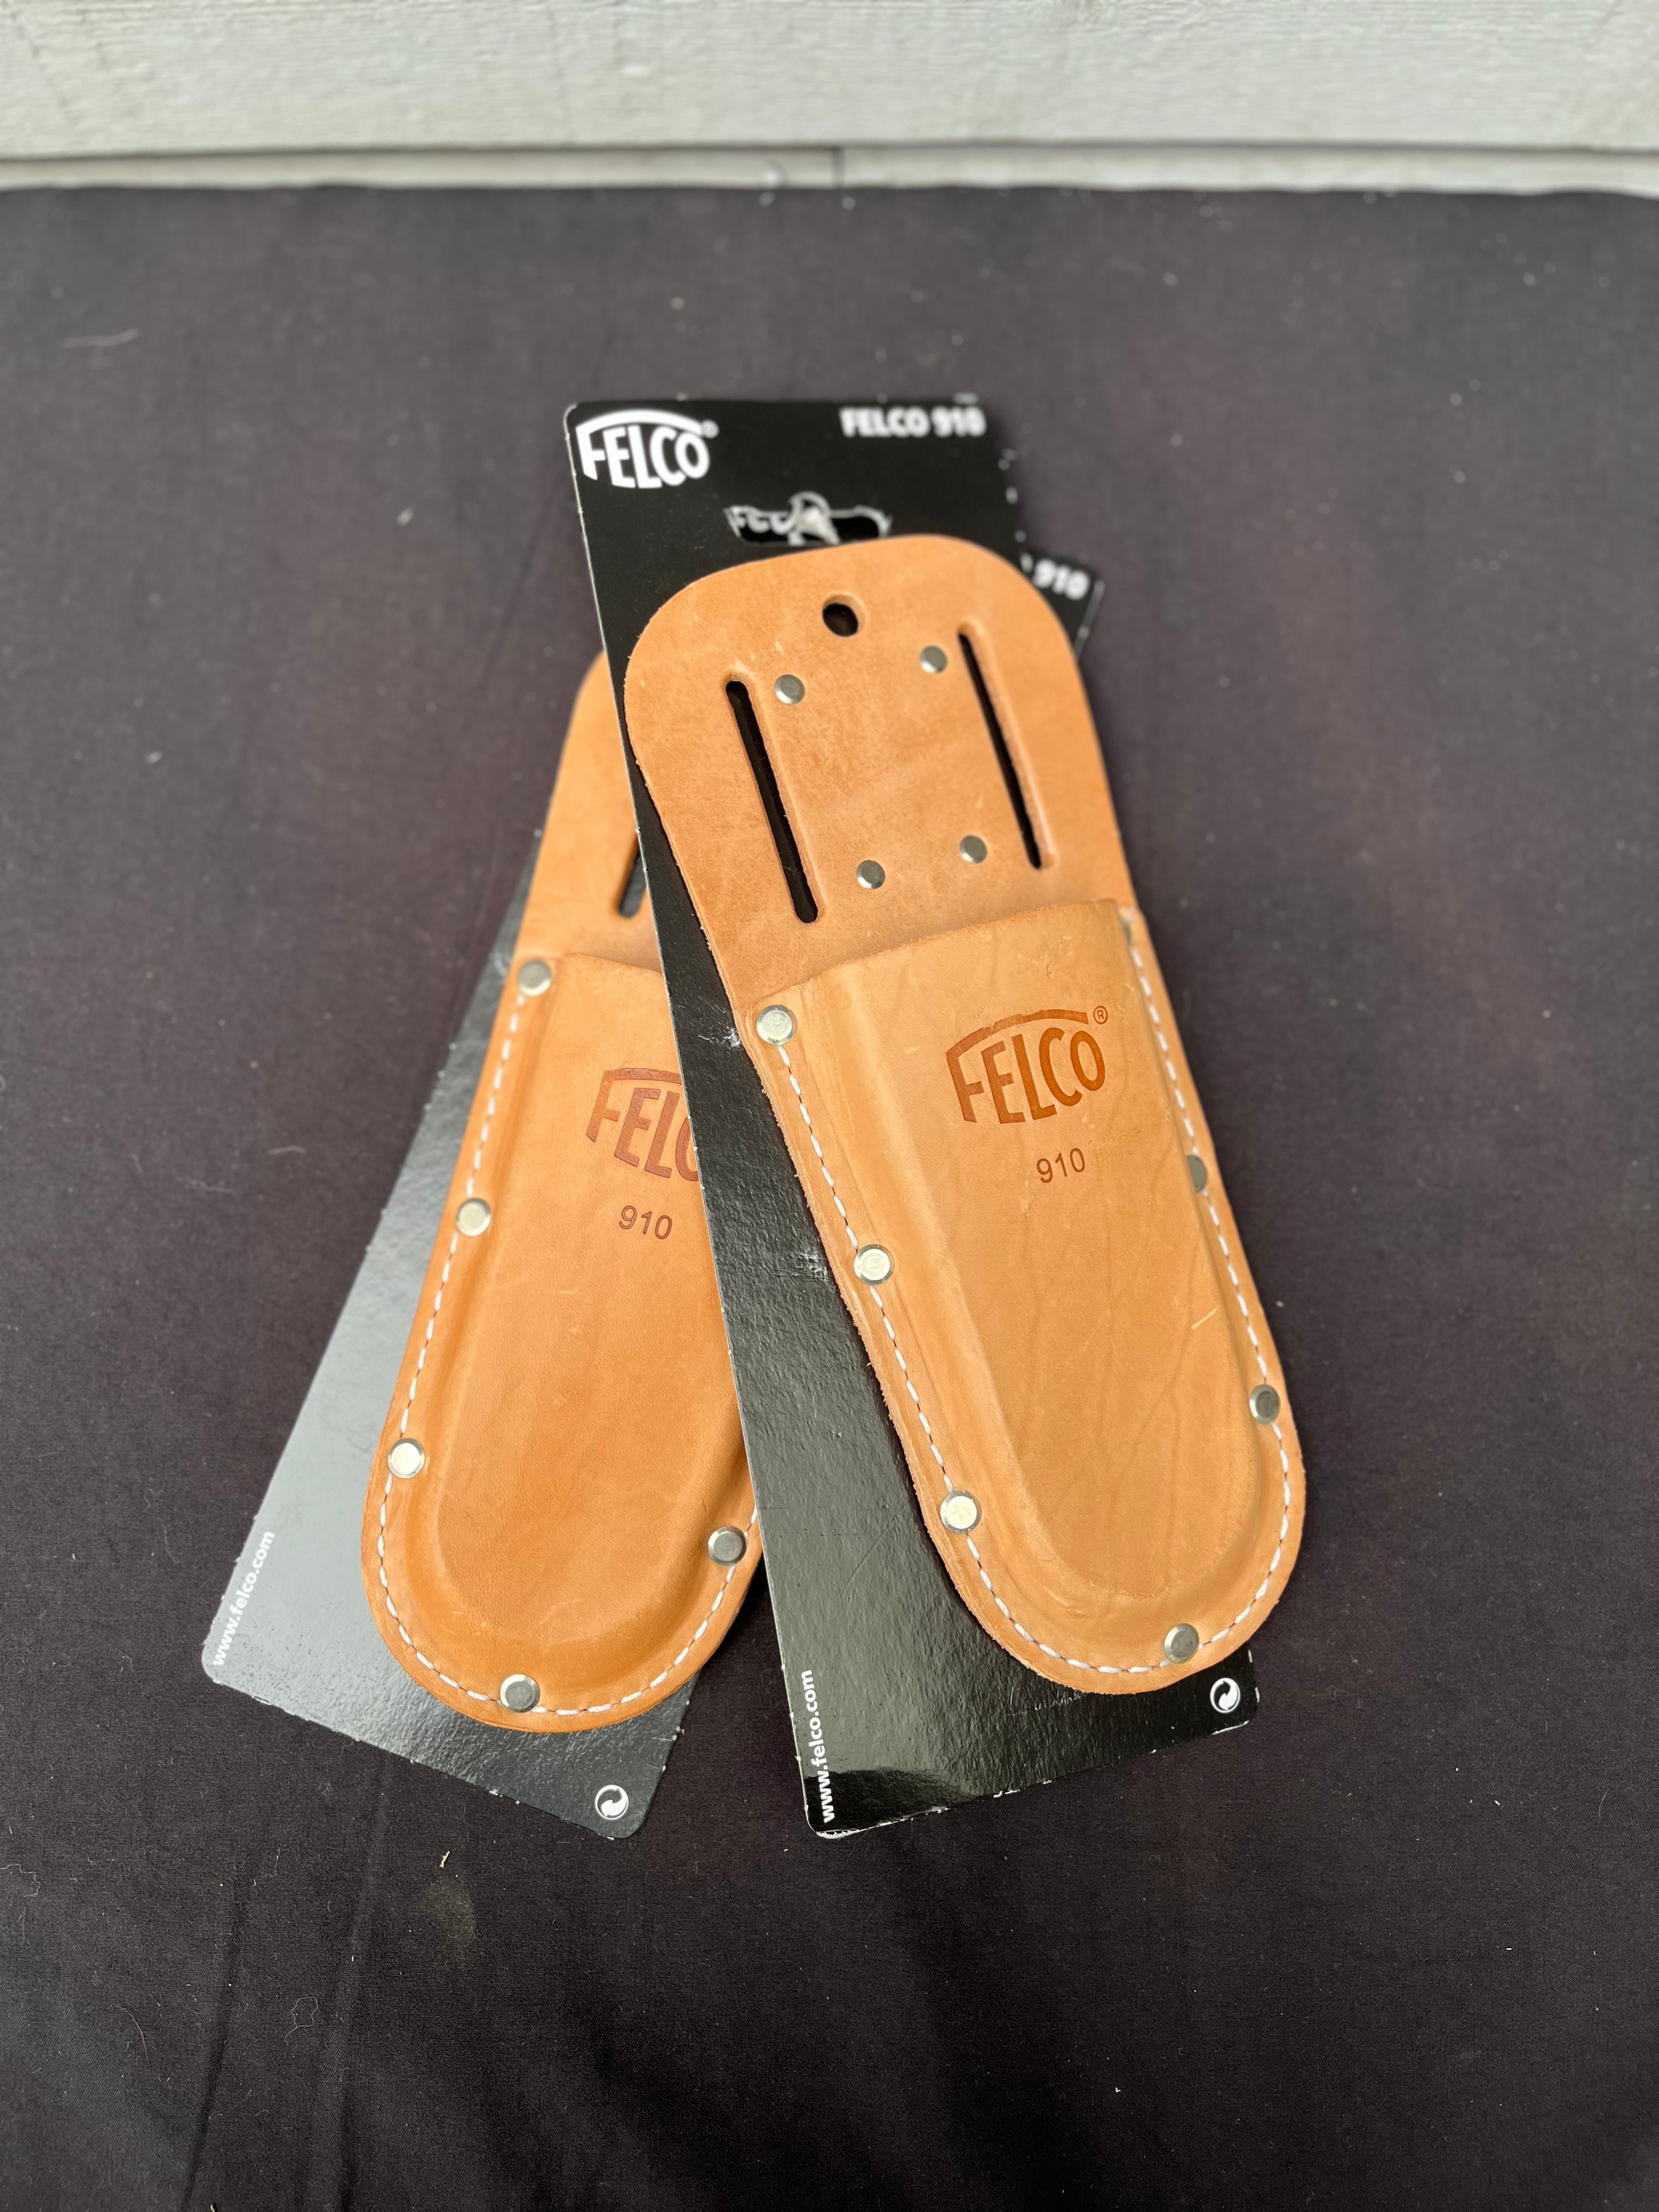 Felco Pruners and Accessories